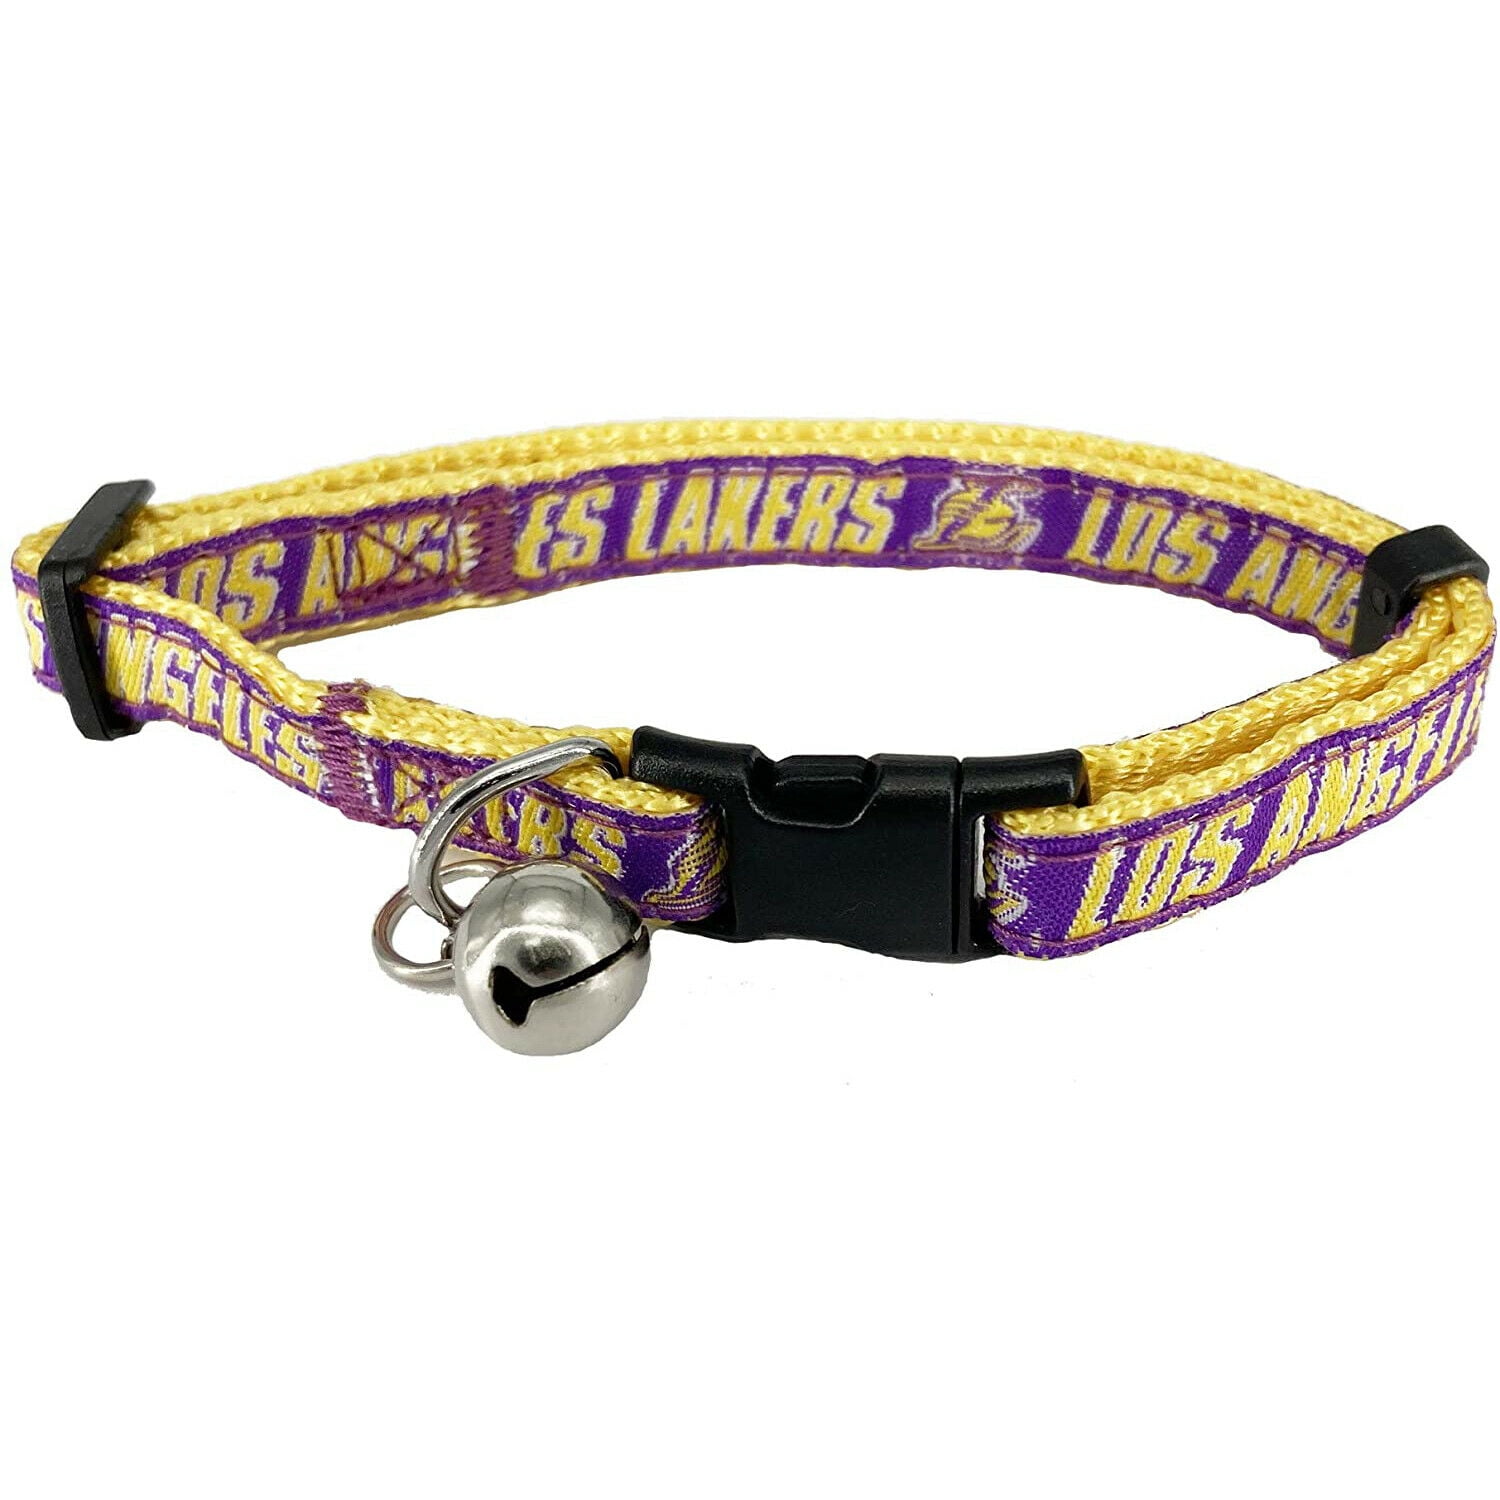 Los Angeles Lakers Dog Jersey- Officially Licensed NBA Pet Clothes at